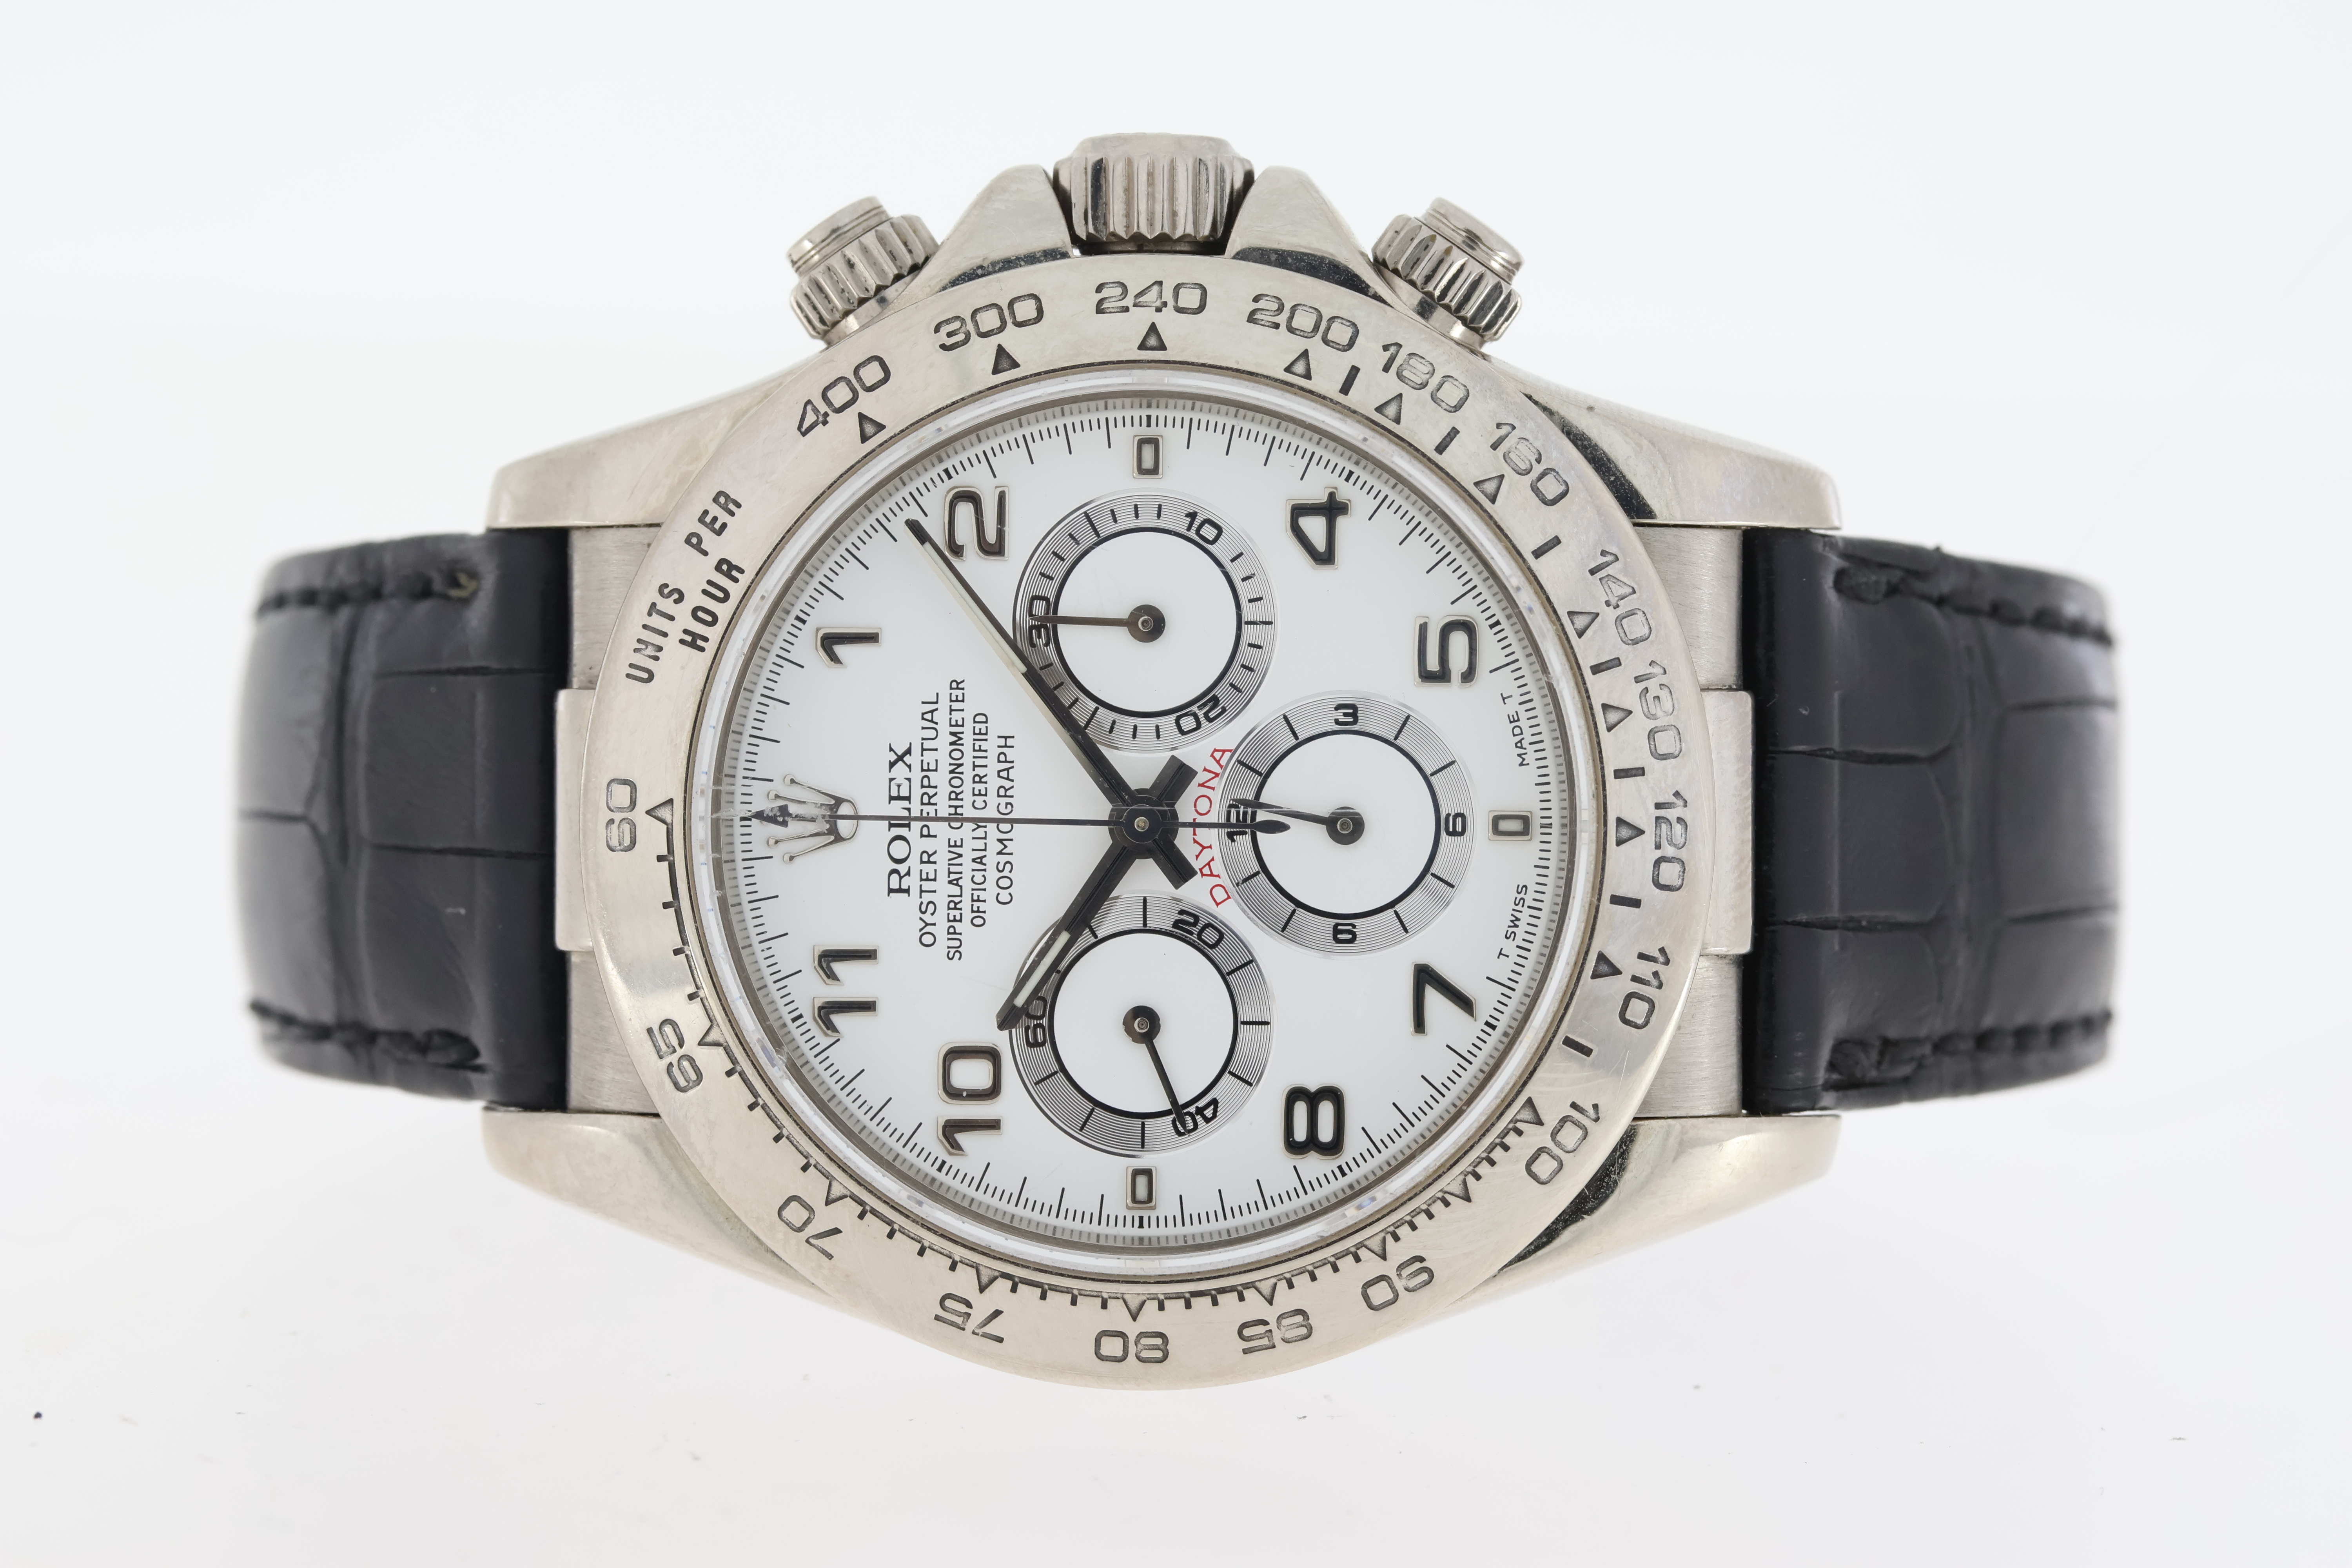 18ct Rolex Daytona 'Zenith' White Gold Reference 16519 with Box - Image 2 of 5